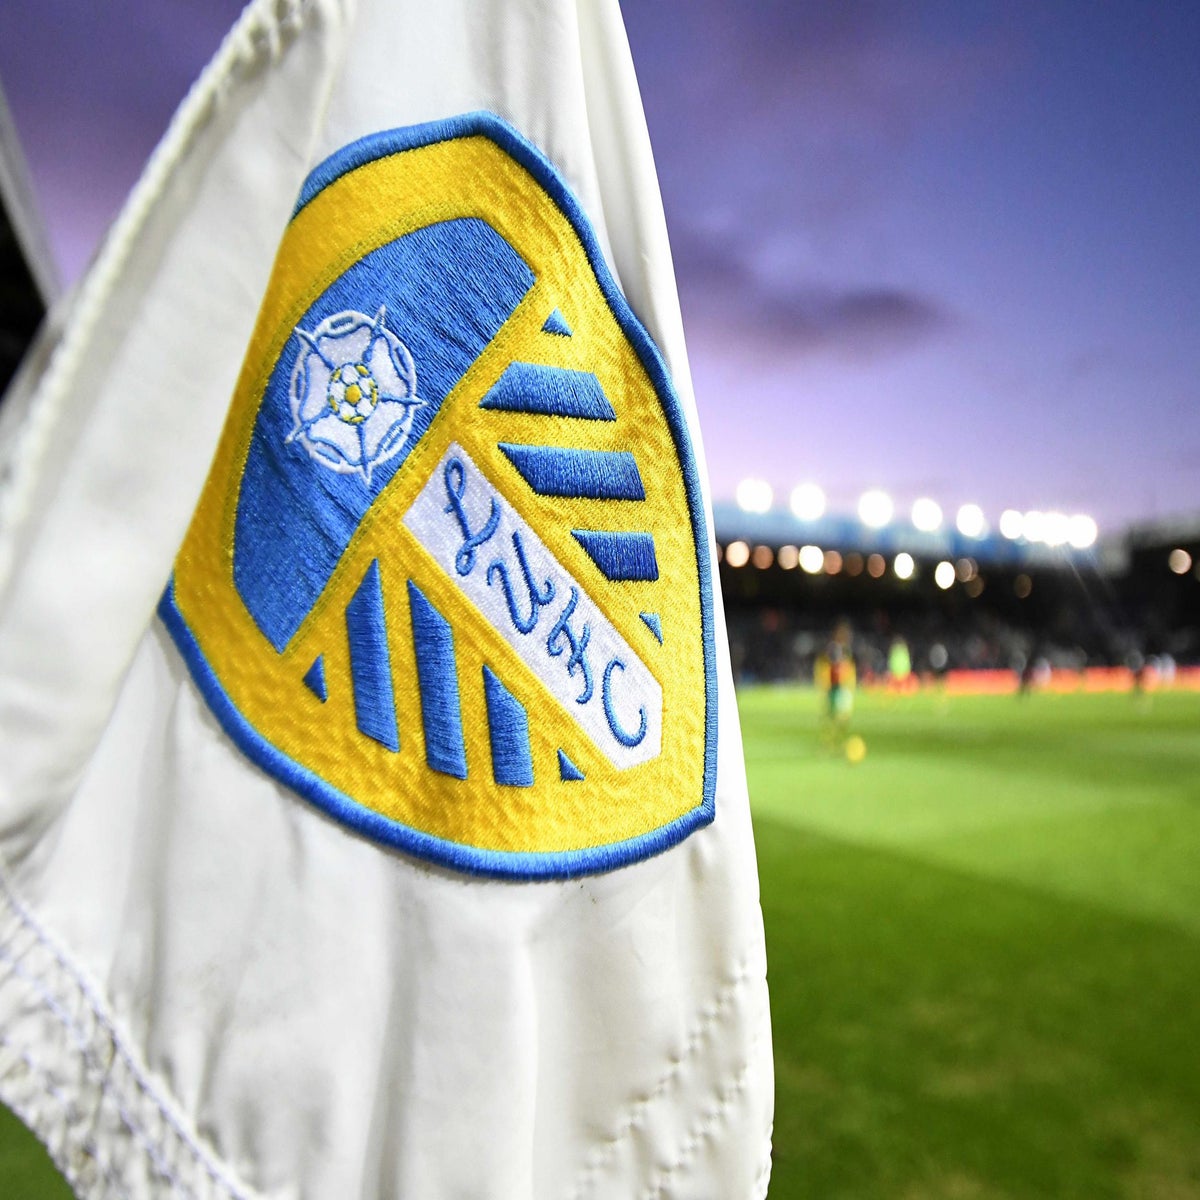 Leeds United news: Owner Andrea Radrizzani considering offers from three  investors, including one that could help club 'compete with Manchester  City', The Independent